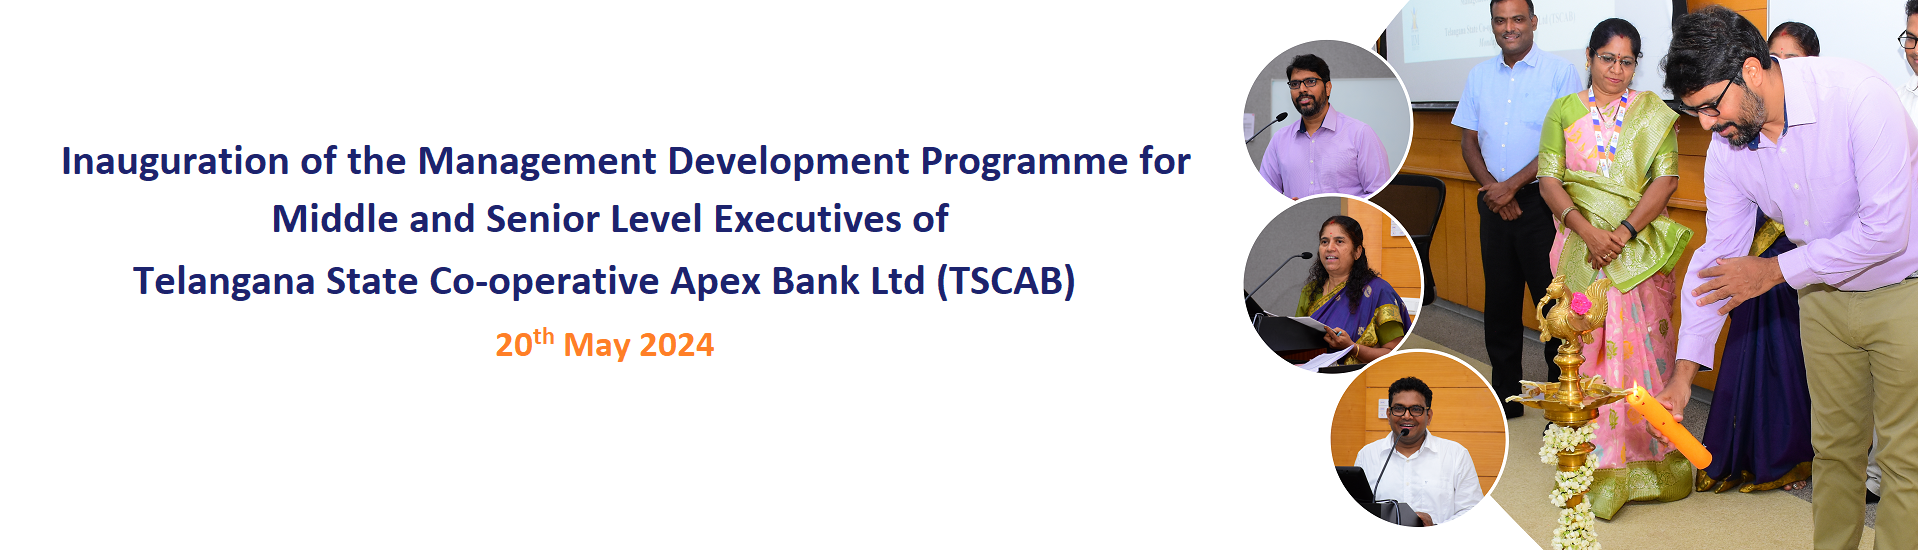 Inauguration of the MDP for Middle and Senior Level Executives of TSCAB